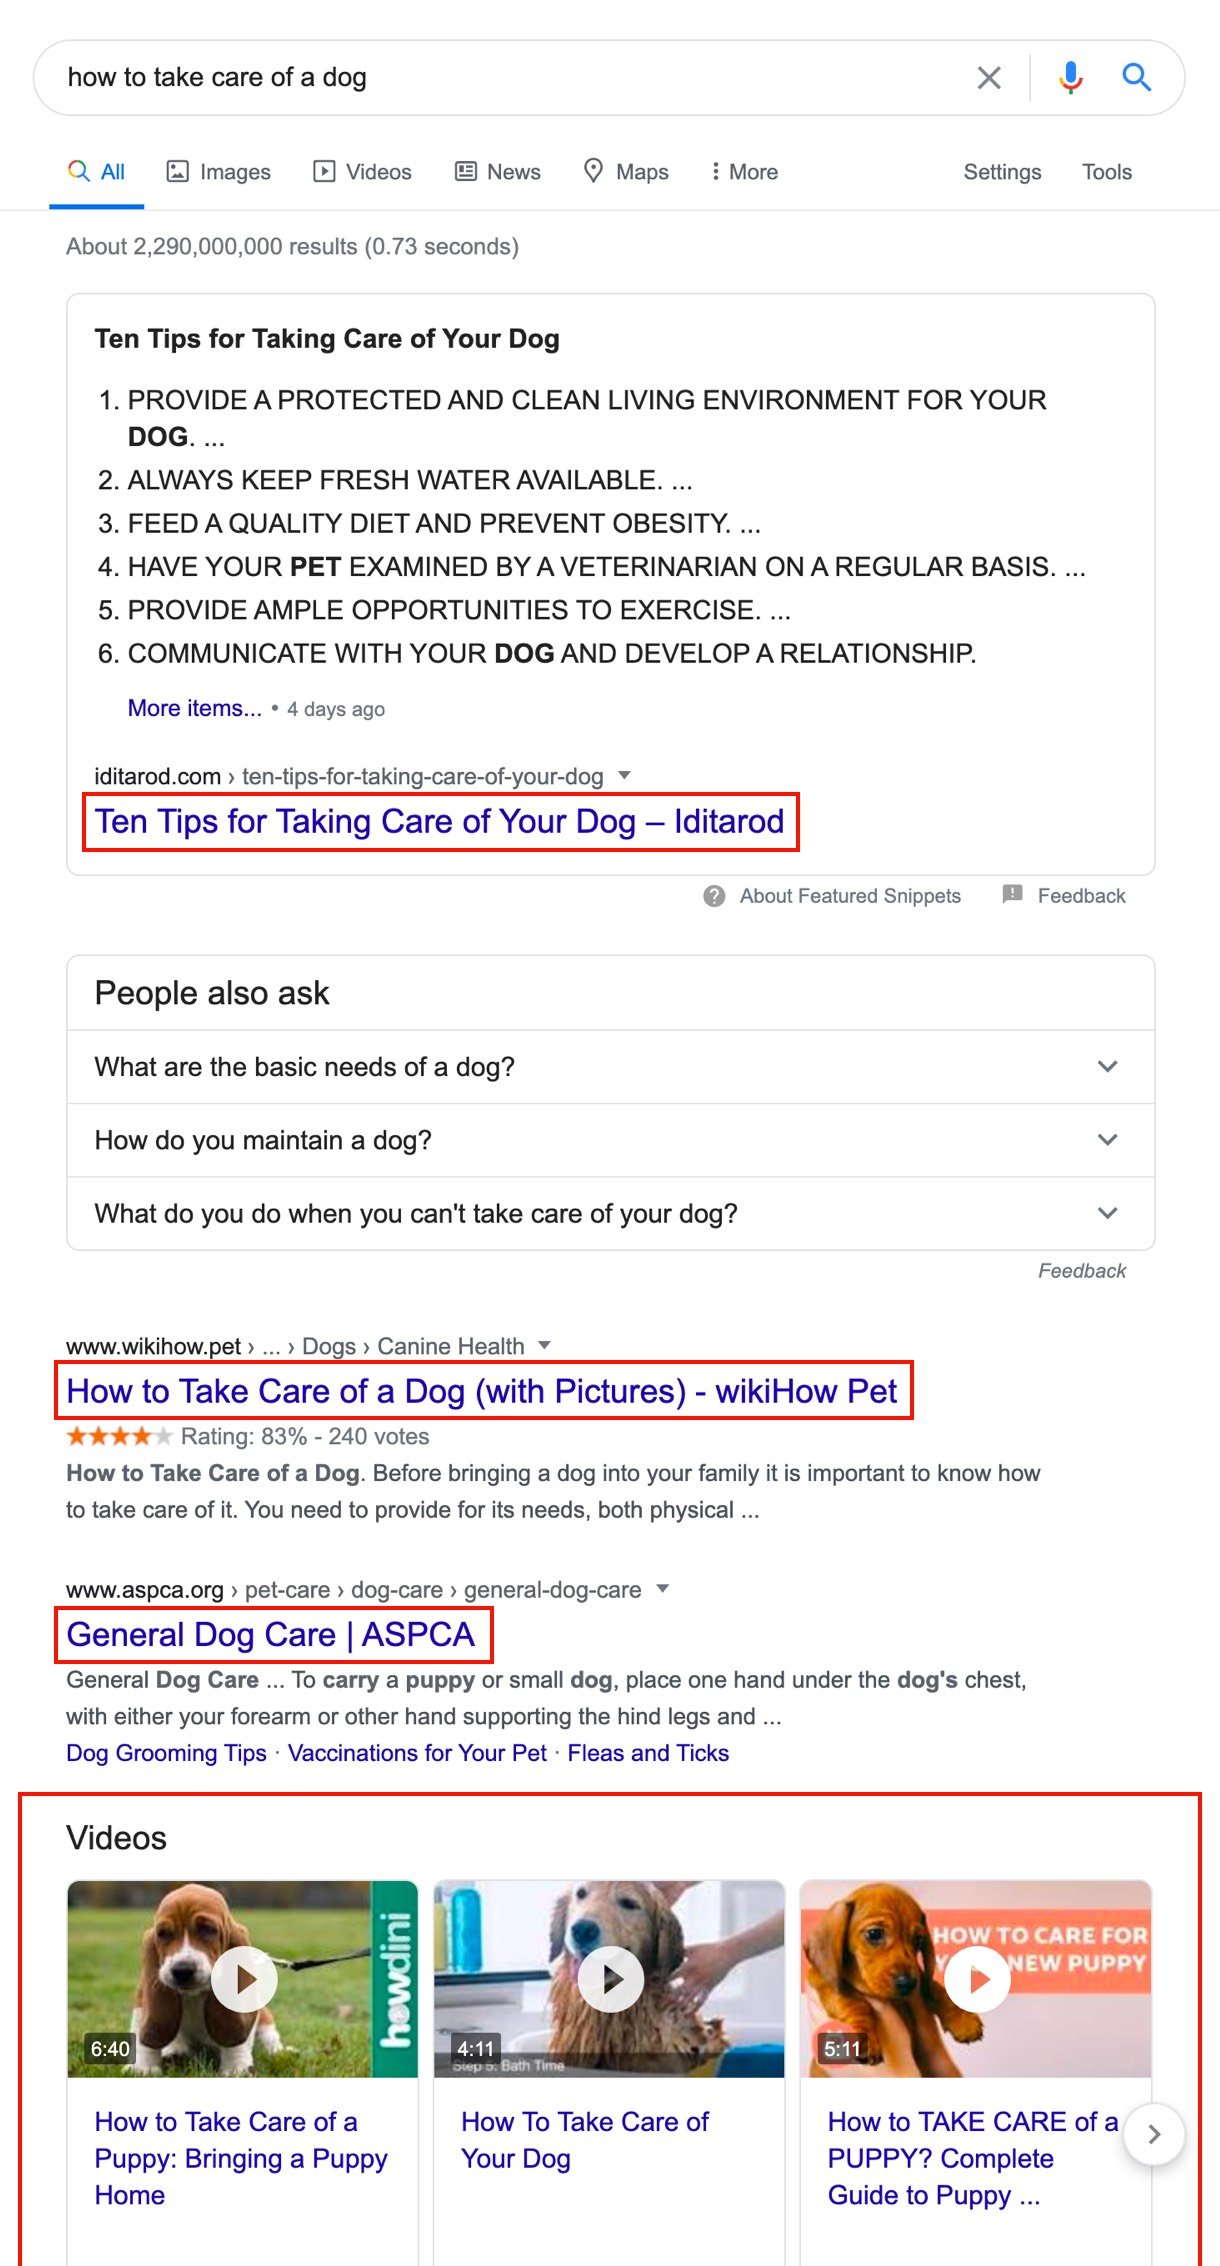 how to take care of a dog search engine result page